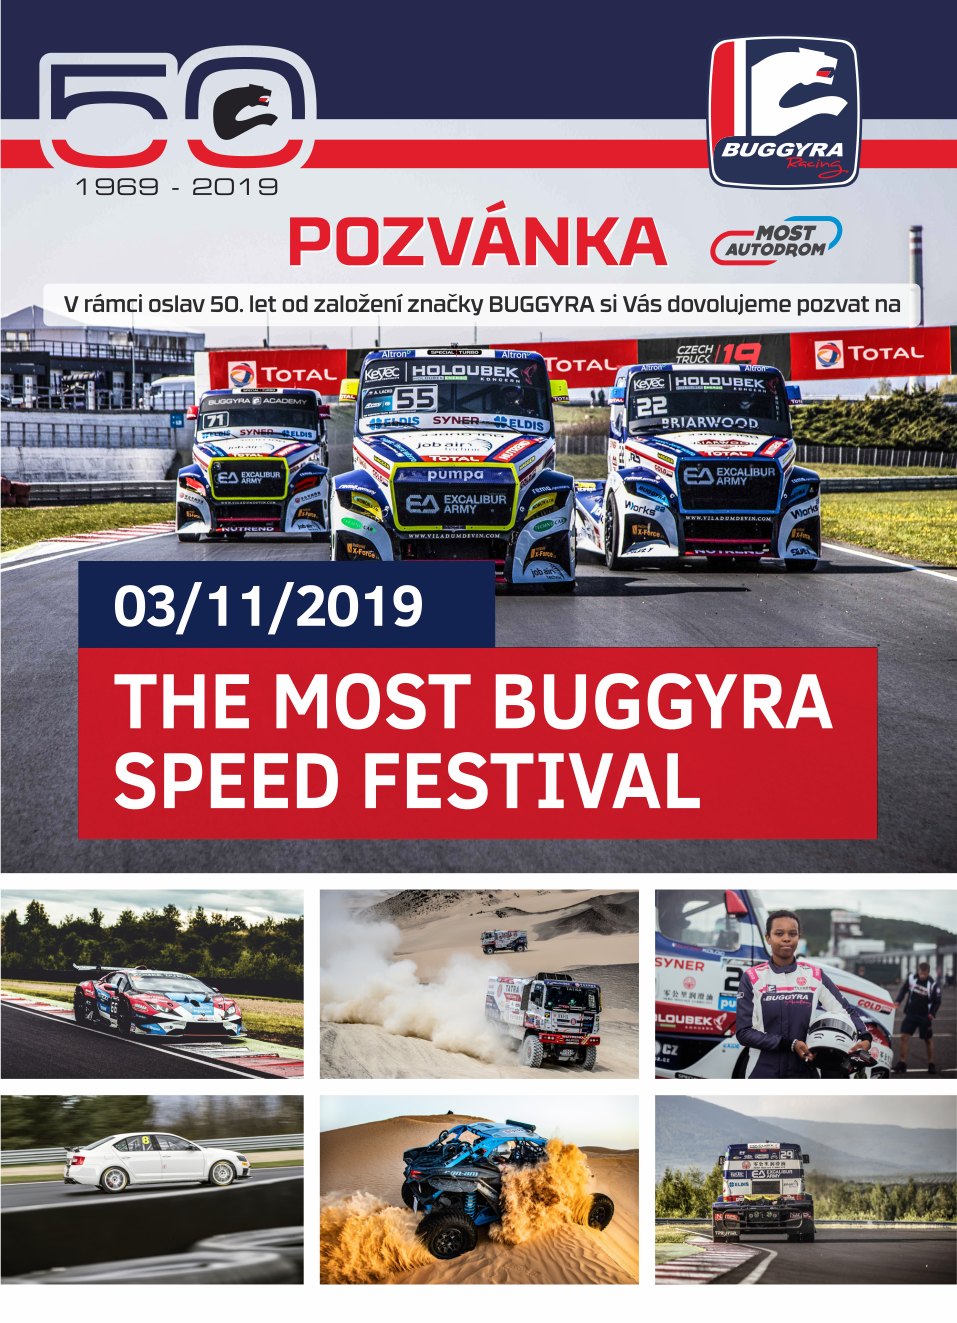 The Most Buggyra speed festival